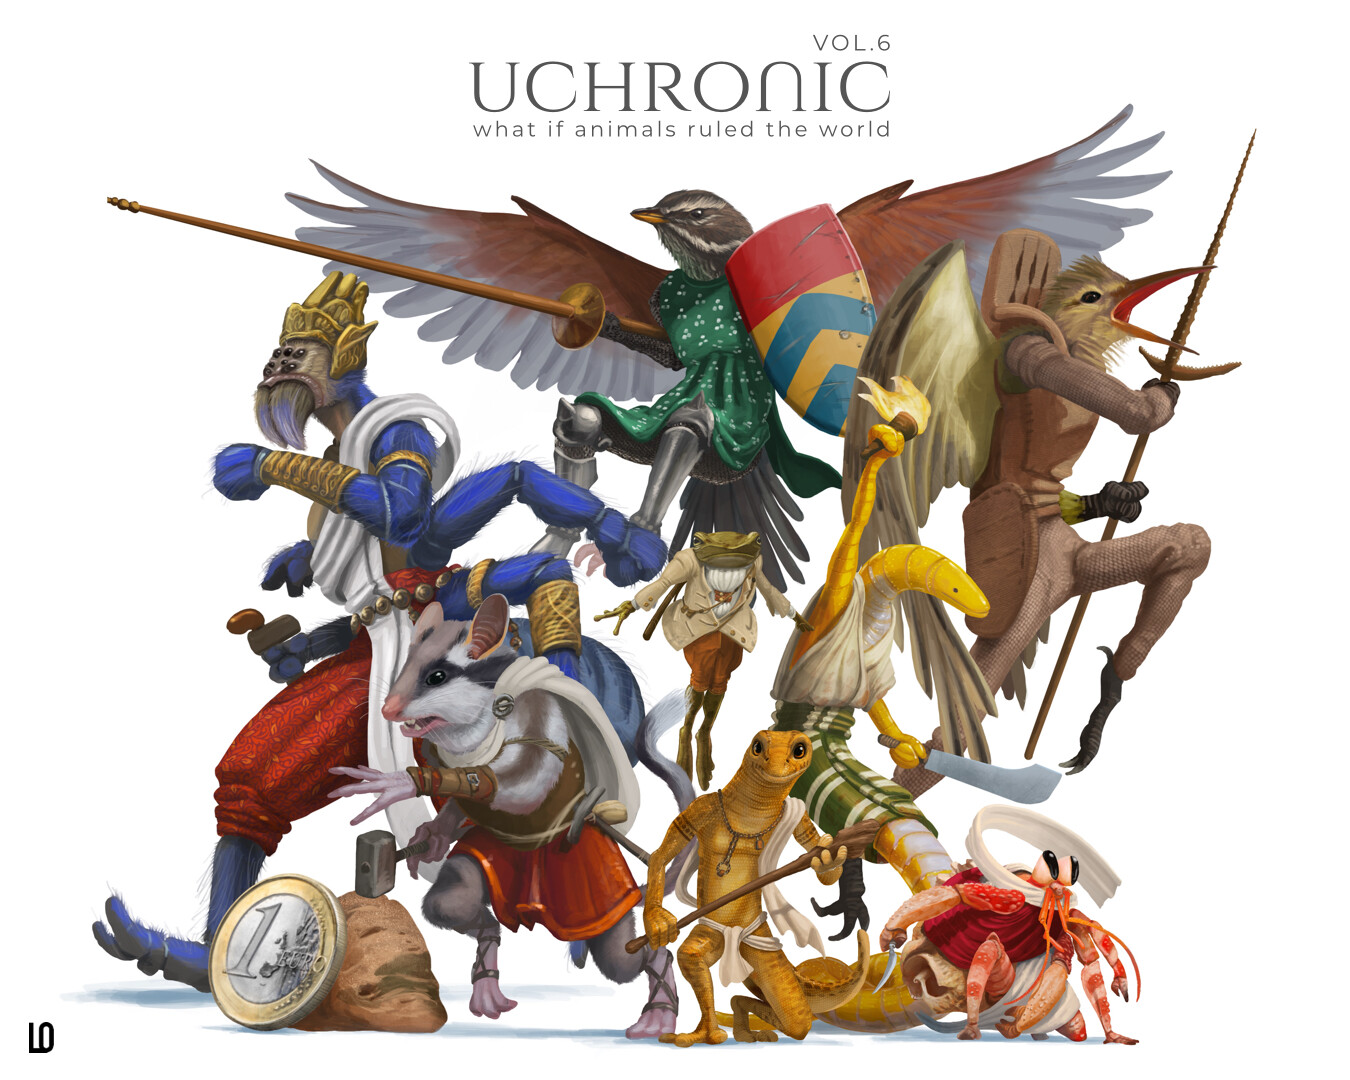 The eight tiny characters from Uchronic Vol.6 reunited!